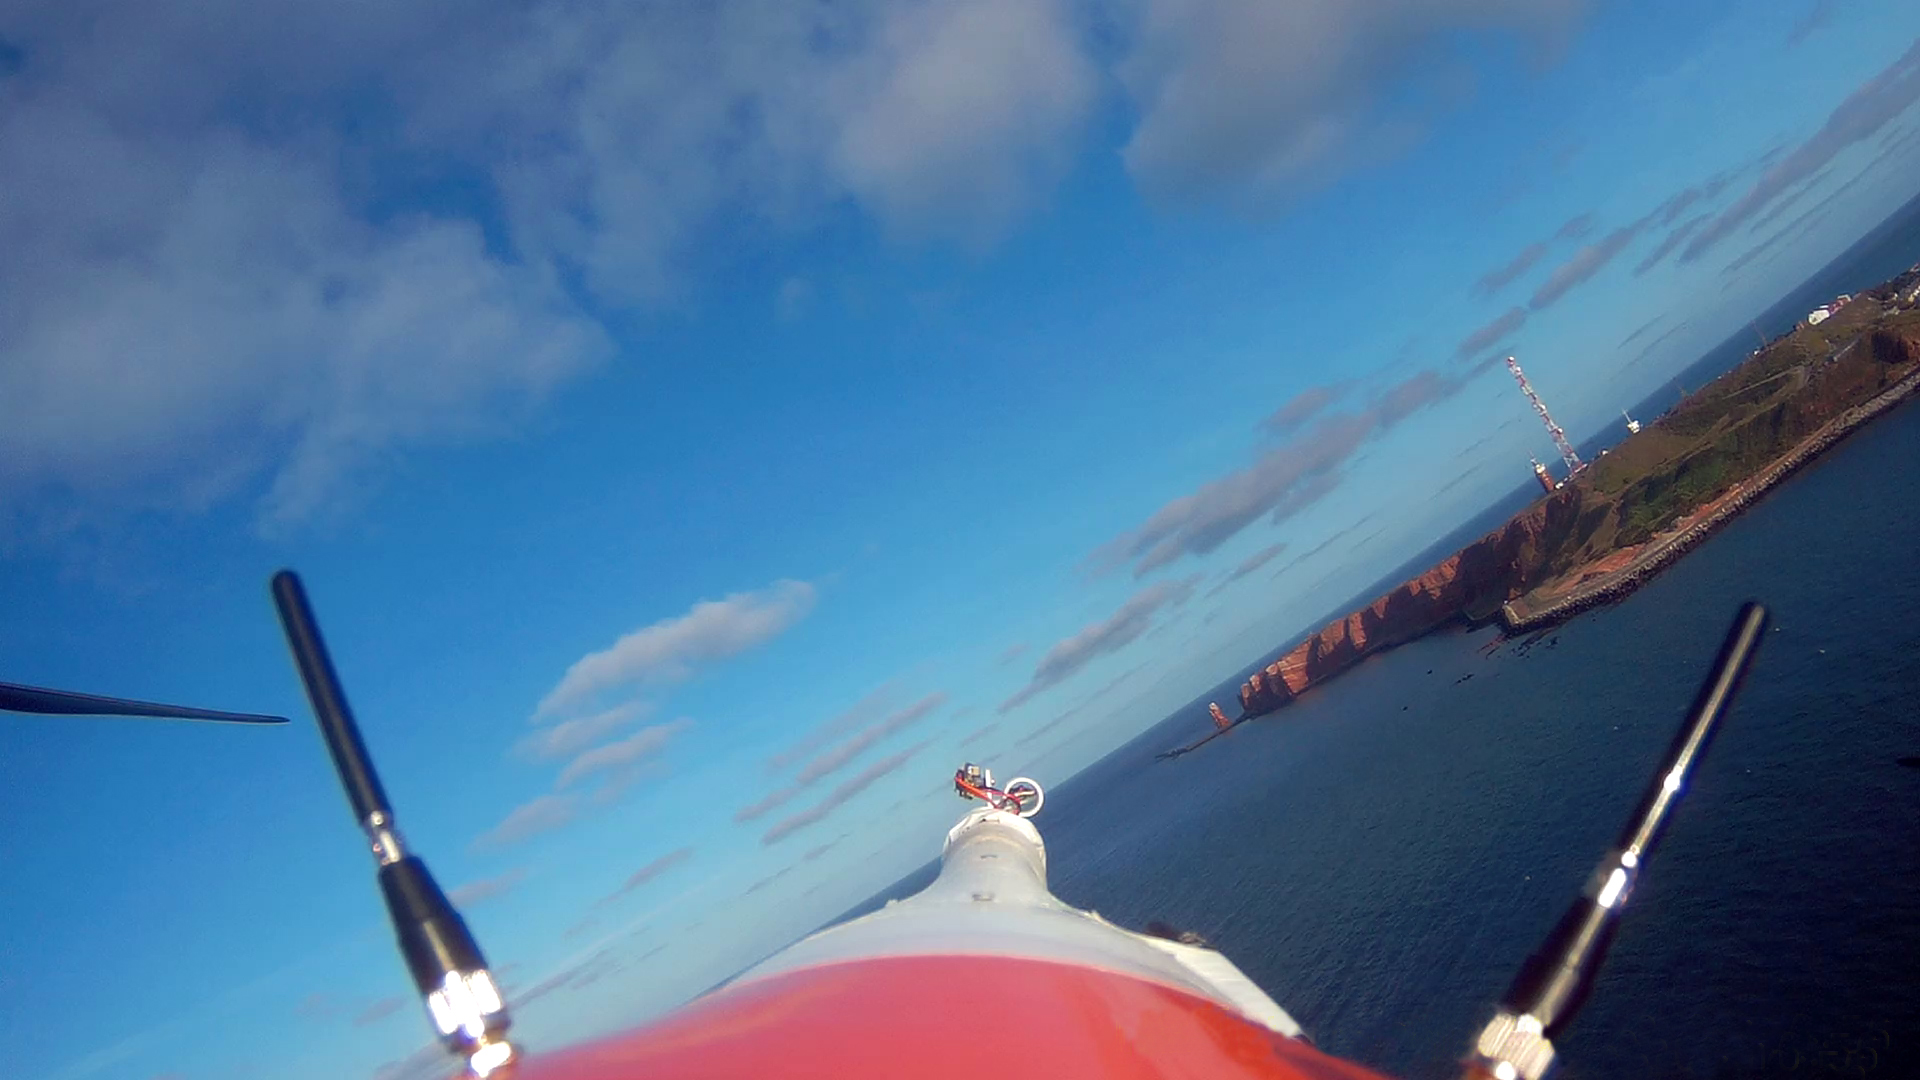 Onboard perspective: Unmanned aerial vehicle approaching Helgoland.